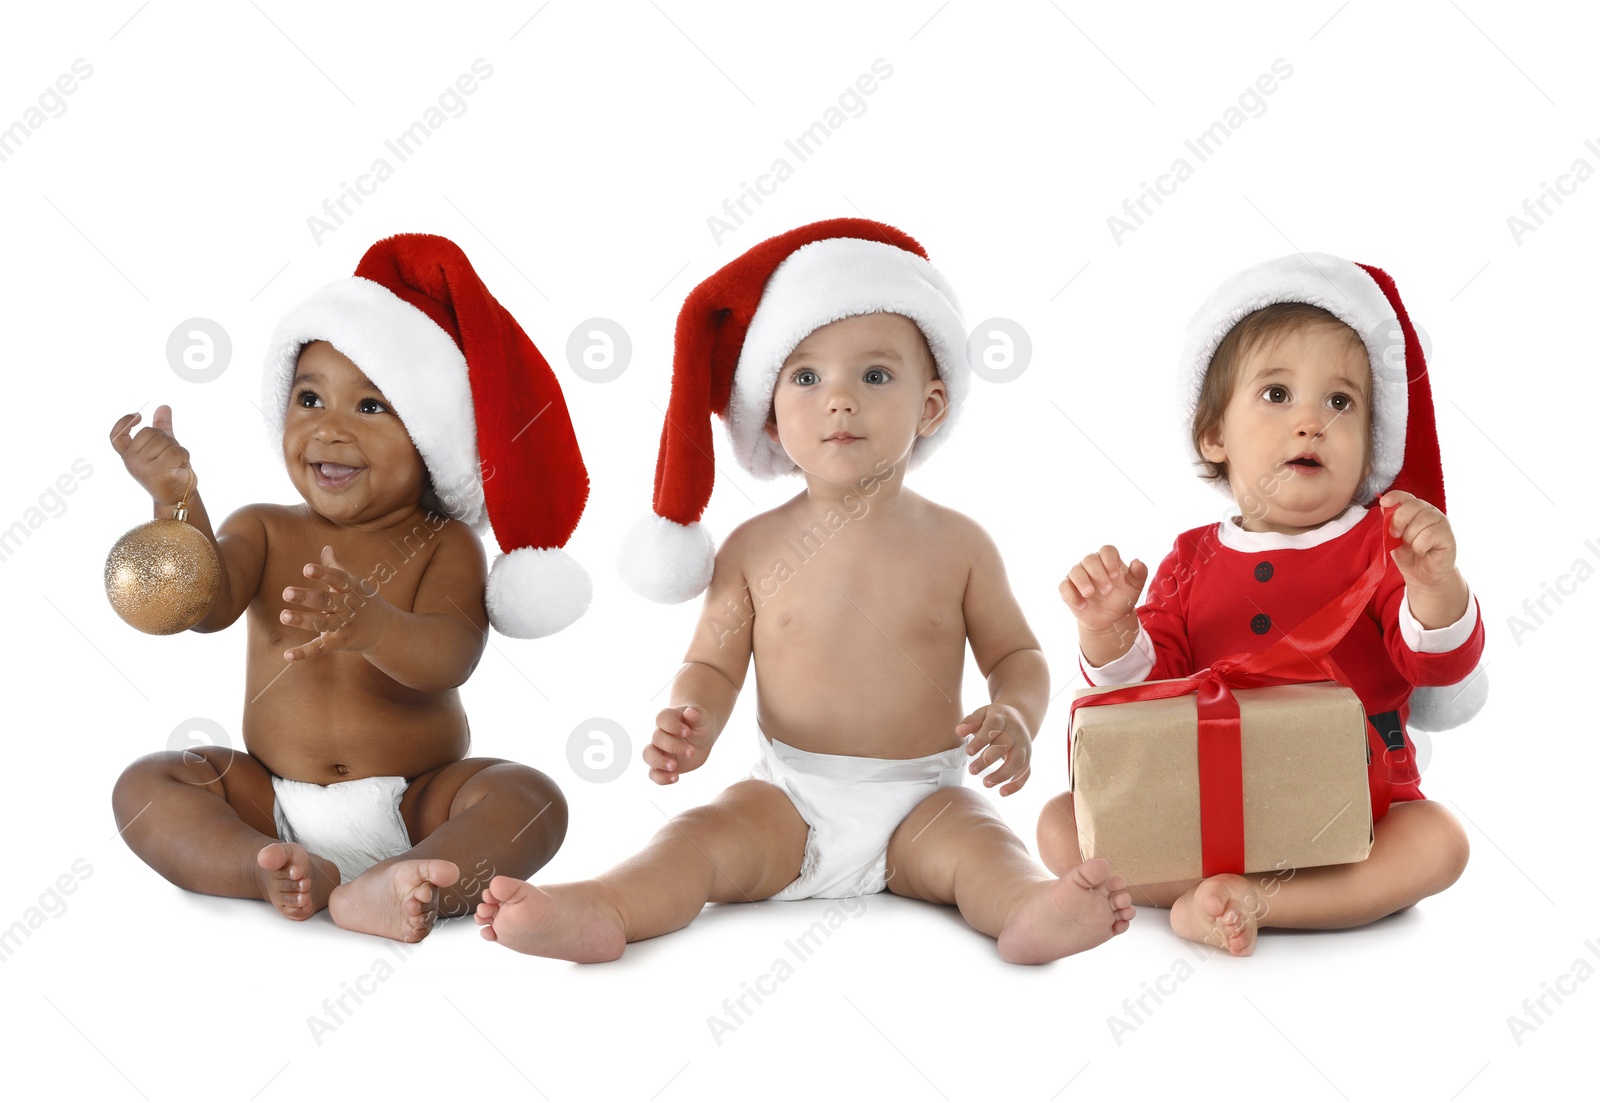 Image of Collage with photos of cute babies wearing Santa hats on white background